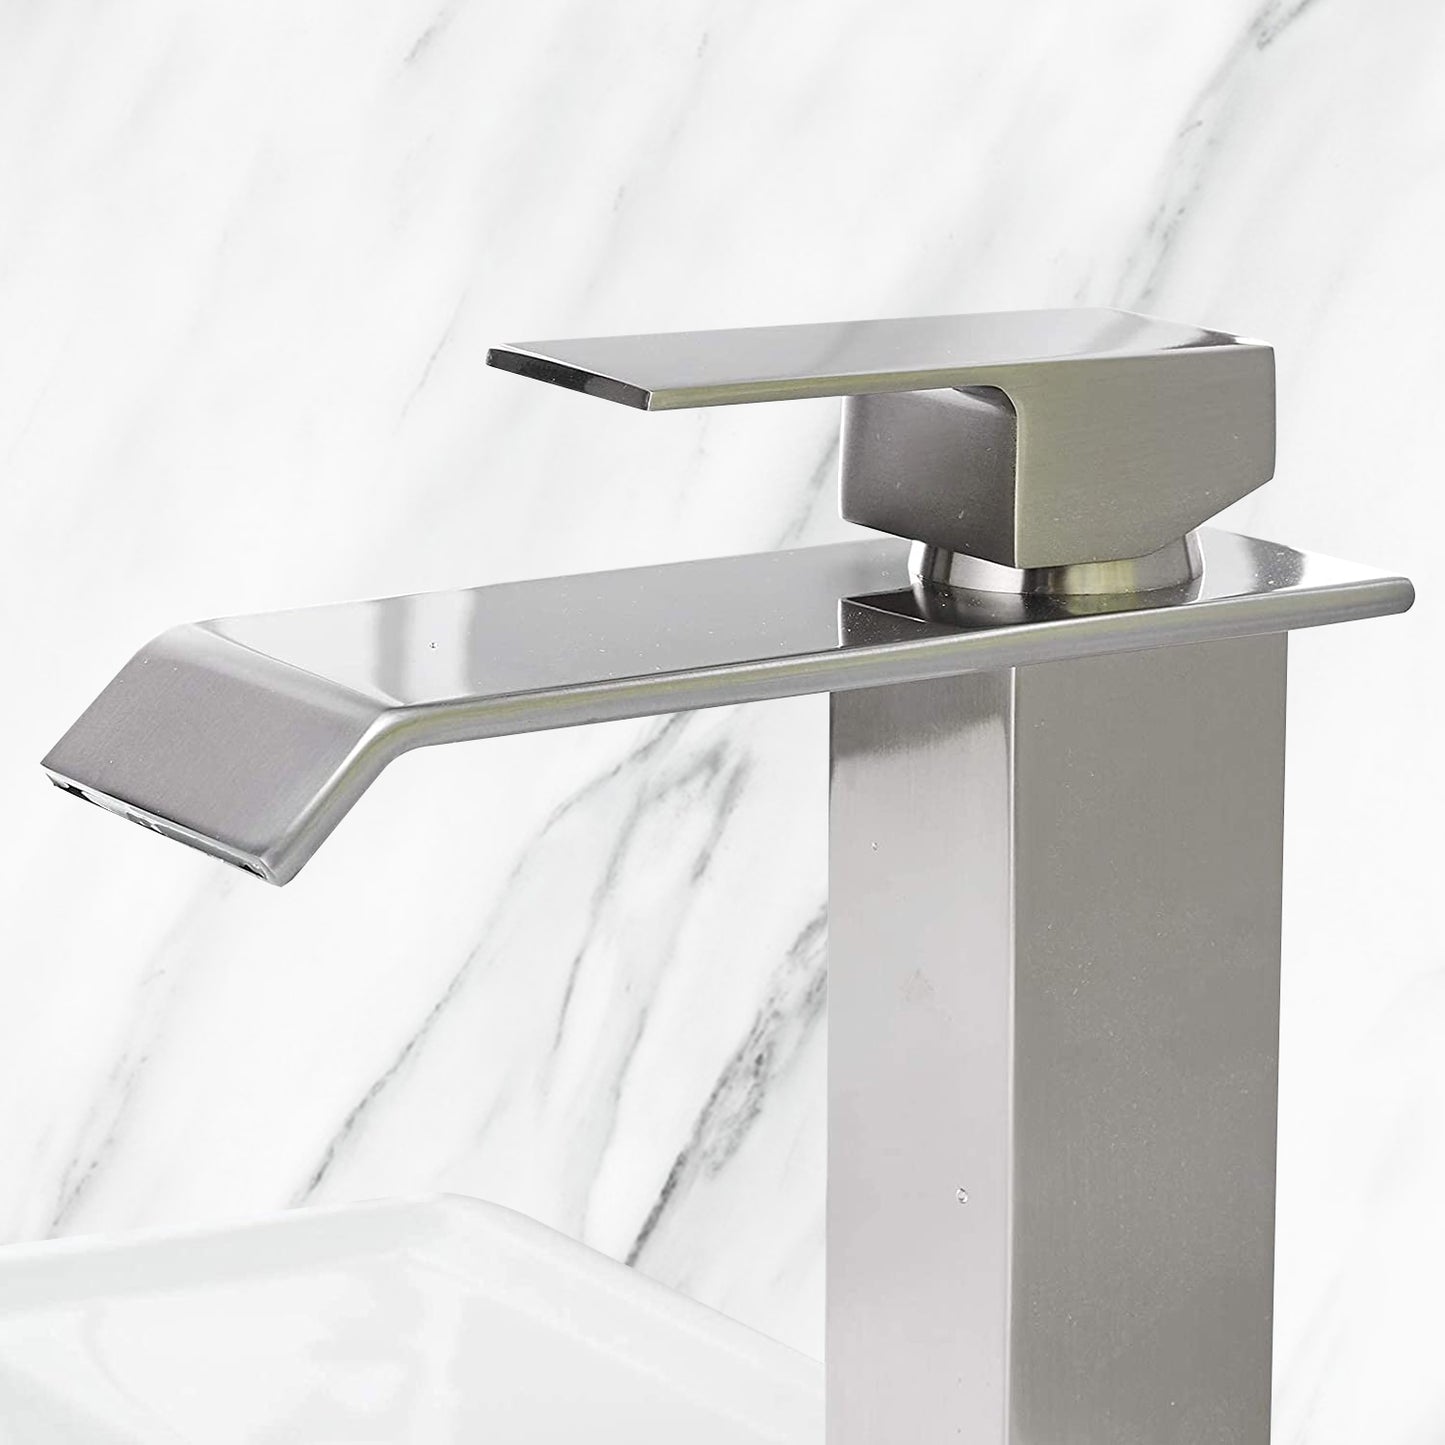 Waterfall Bathroom Faucet with Single Handle and Soft Water Flow